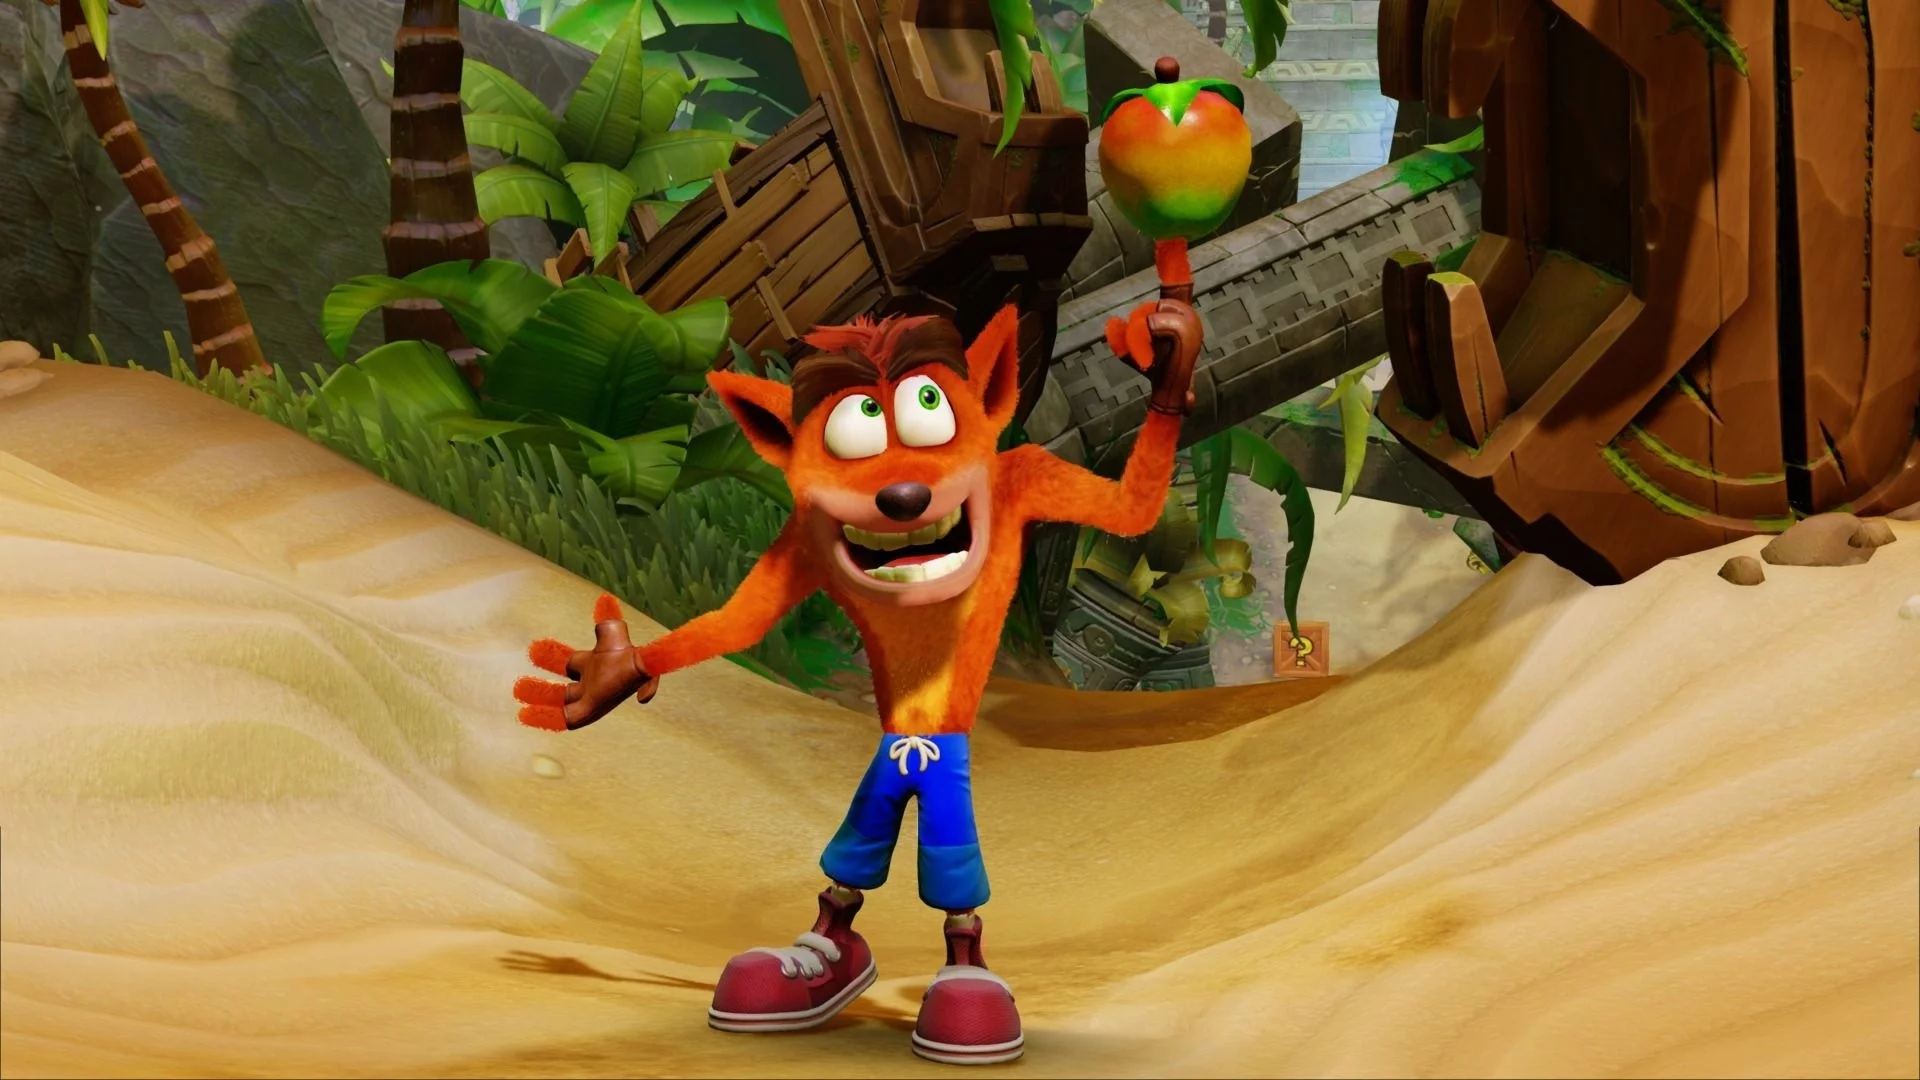 The next Crash Bandicoot game might be for mobiles only